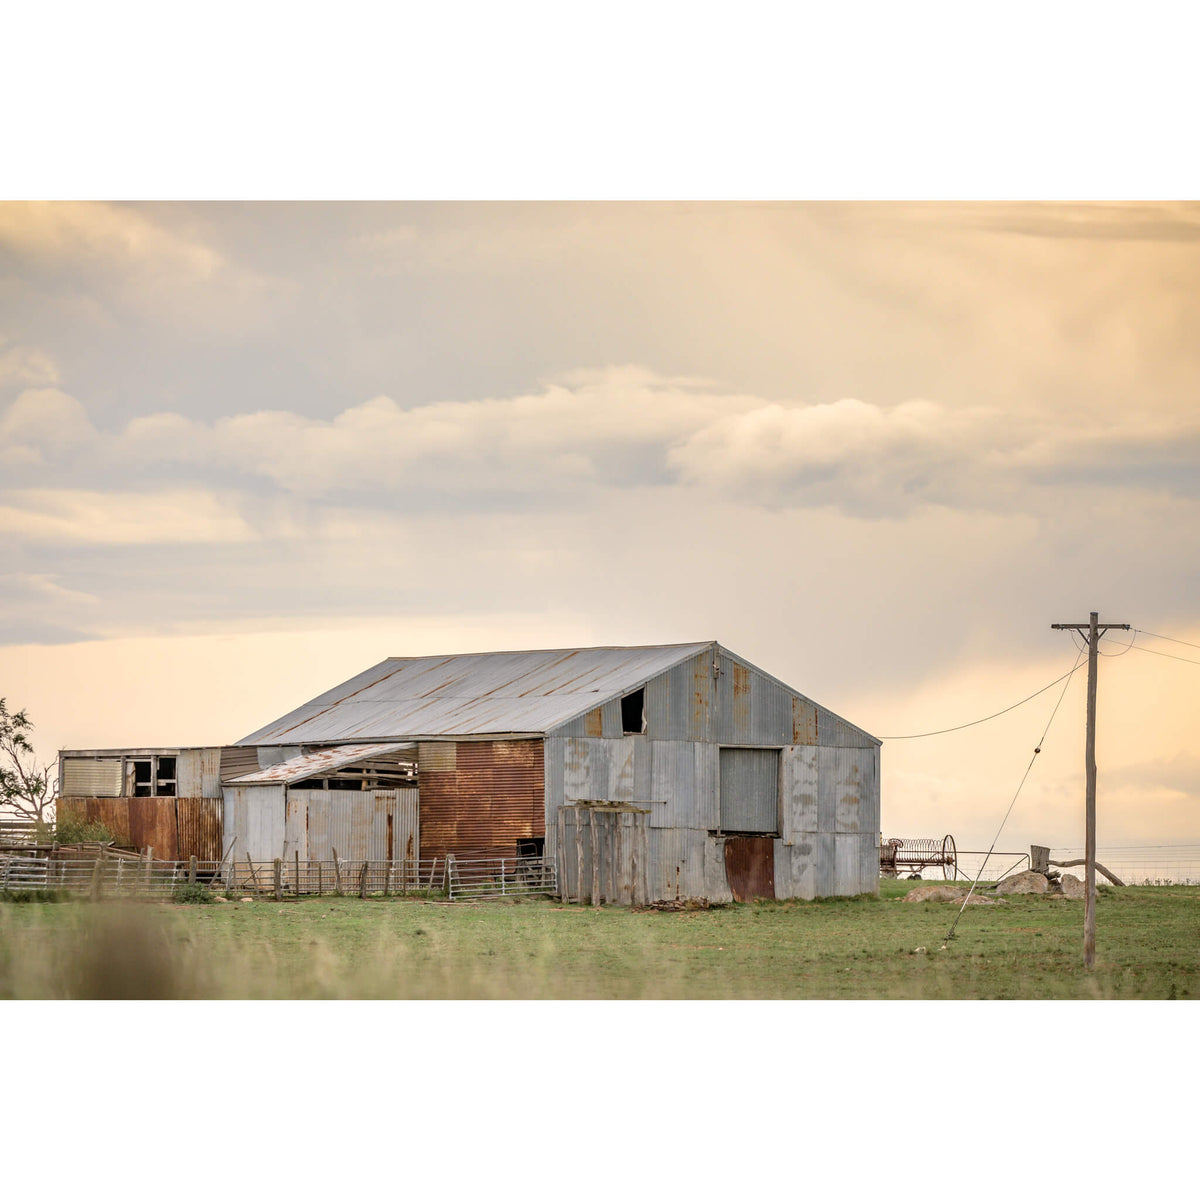 Maffra Woolshed | The Woolshed Fine Art Print - Lost Collective Shop